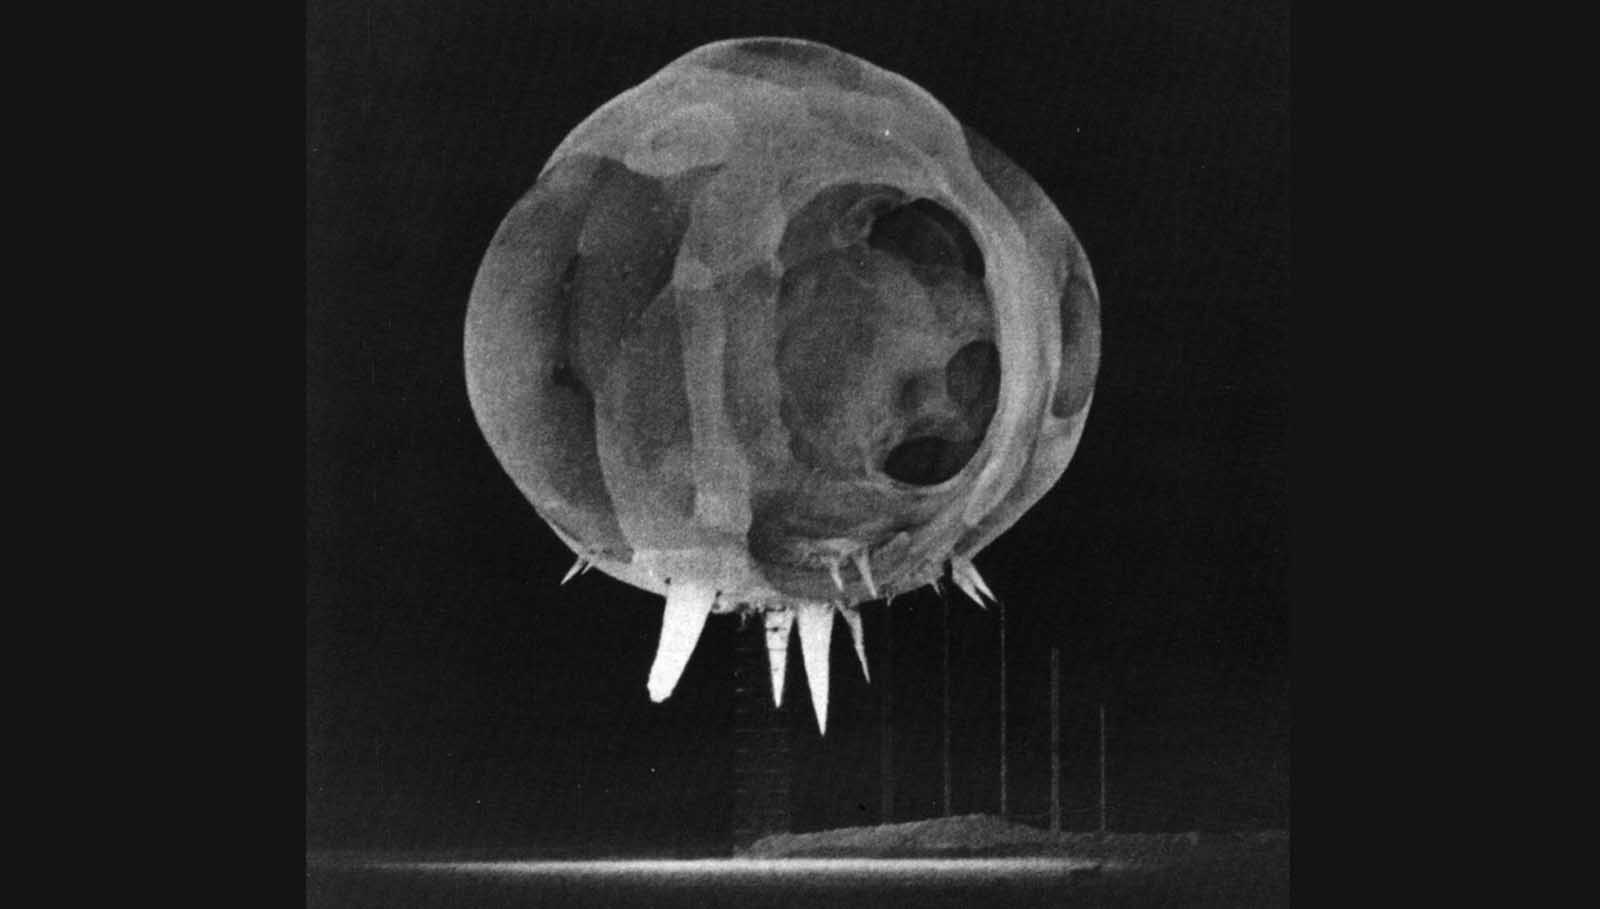 “Rope tricks” are seen in this image of a nuclear explosion taken less than one millisecond after detonation. During Operation Tumbler-Snapper in 1952, this nuclear test device was suspended 300 feet above the Nevada desert floor and anchored by mooring cables. As the ball of plasma expanded, the radiating energy superheated and vaporized the cables just ahead of the fireball, resulting in the “spike” effects.